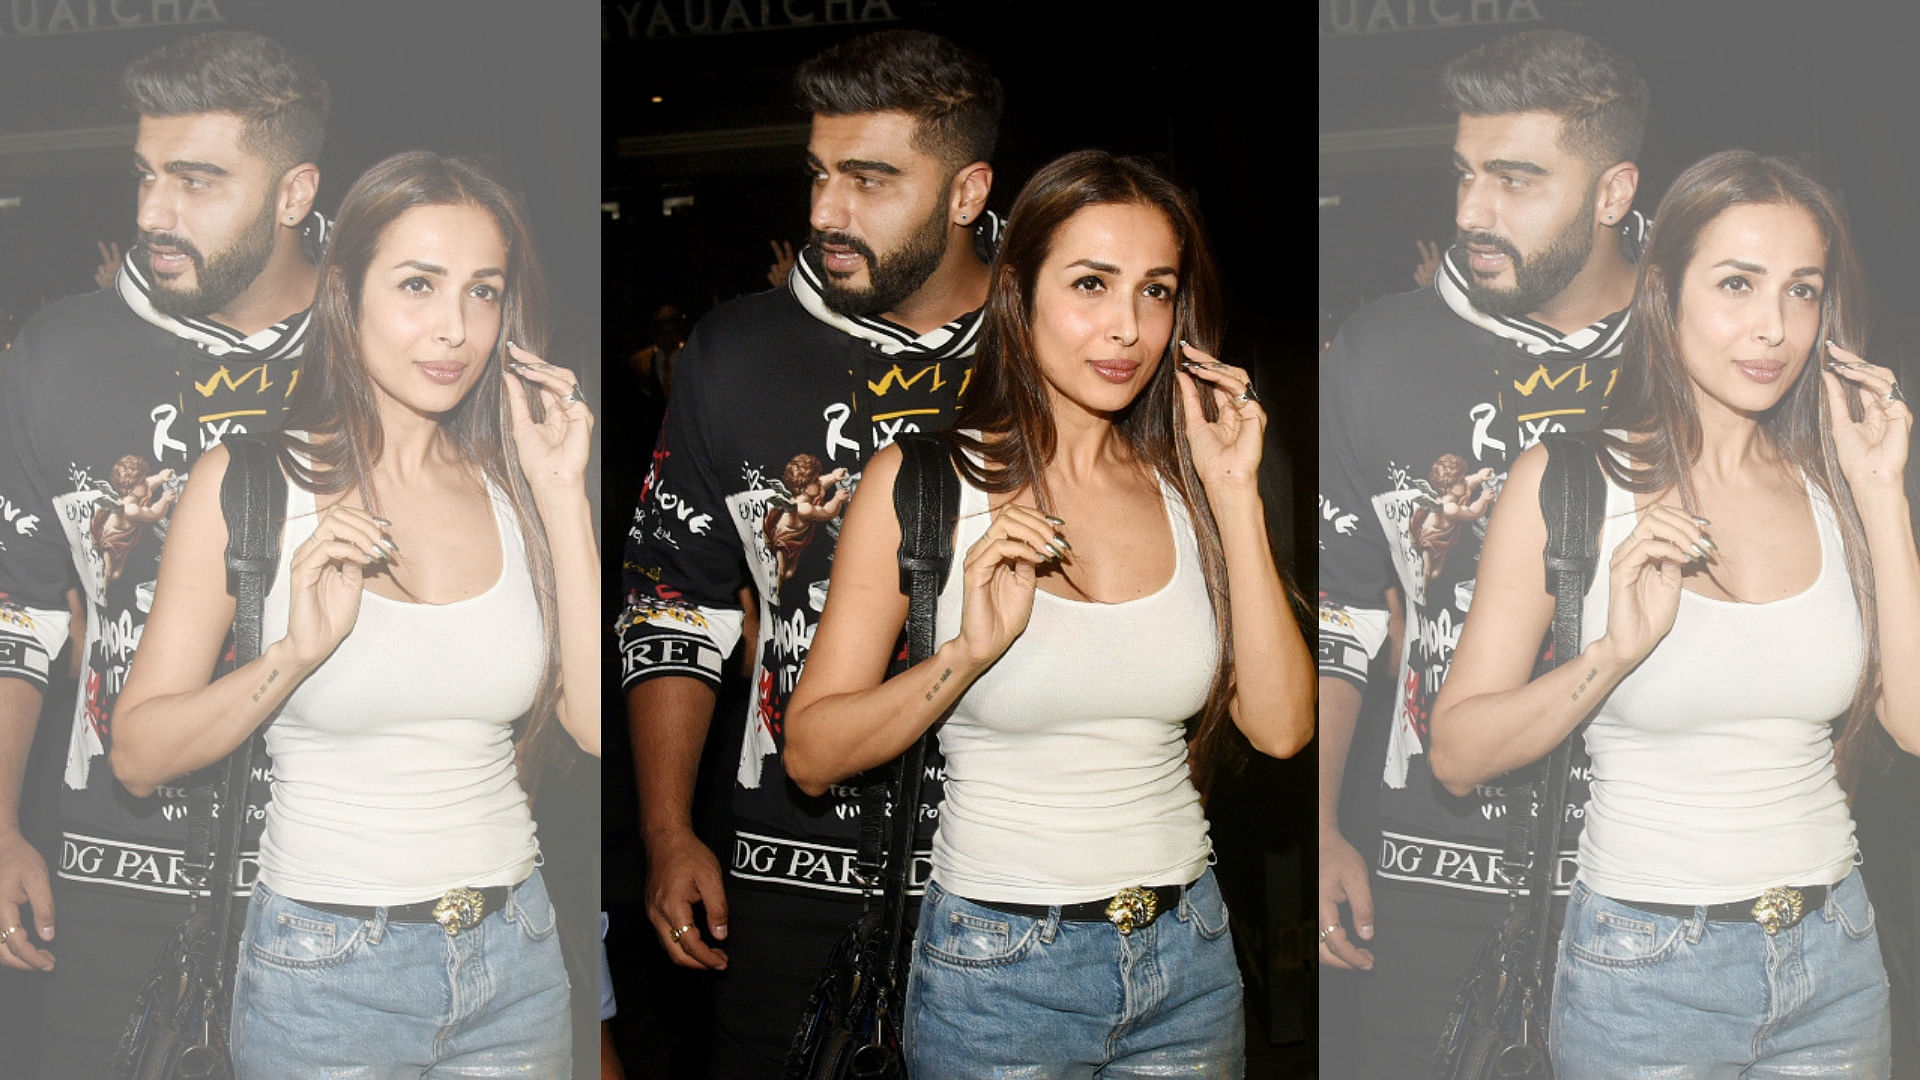 Malaika Arora and Arjun Kapoor have not officially confirmed their relationship yet.